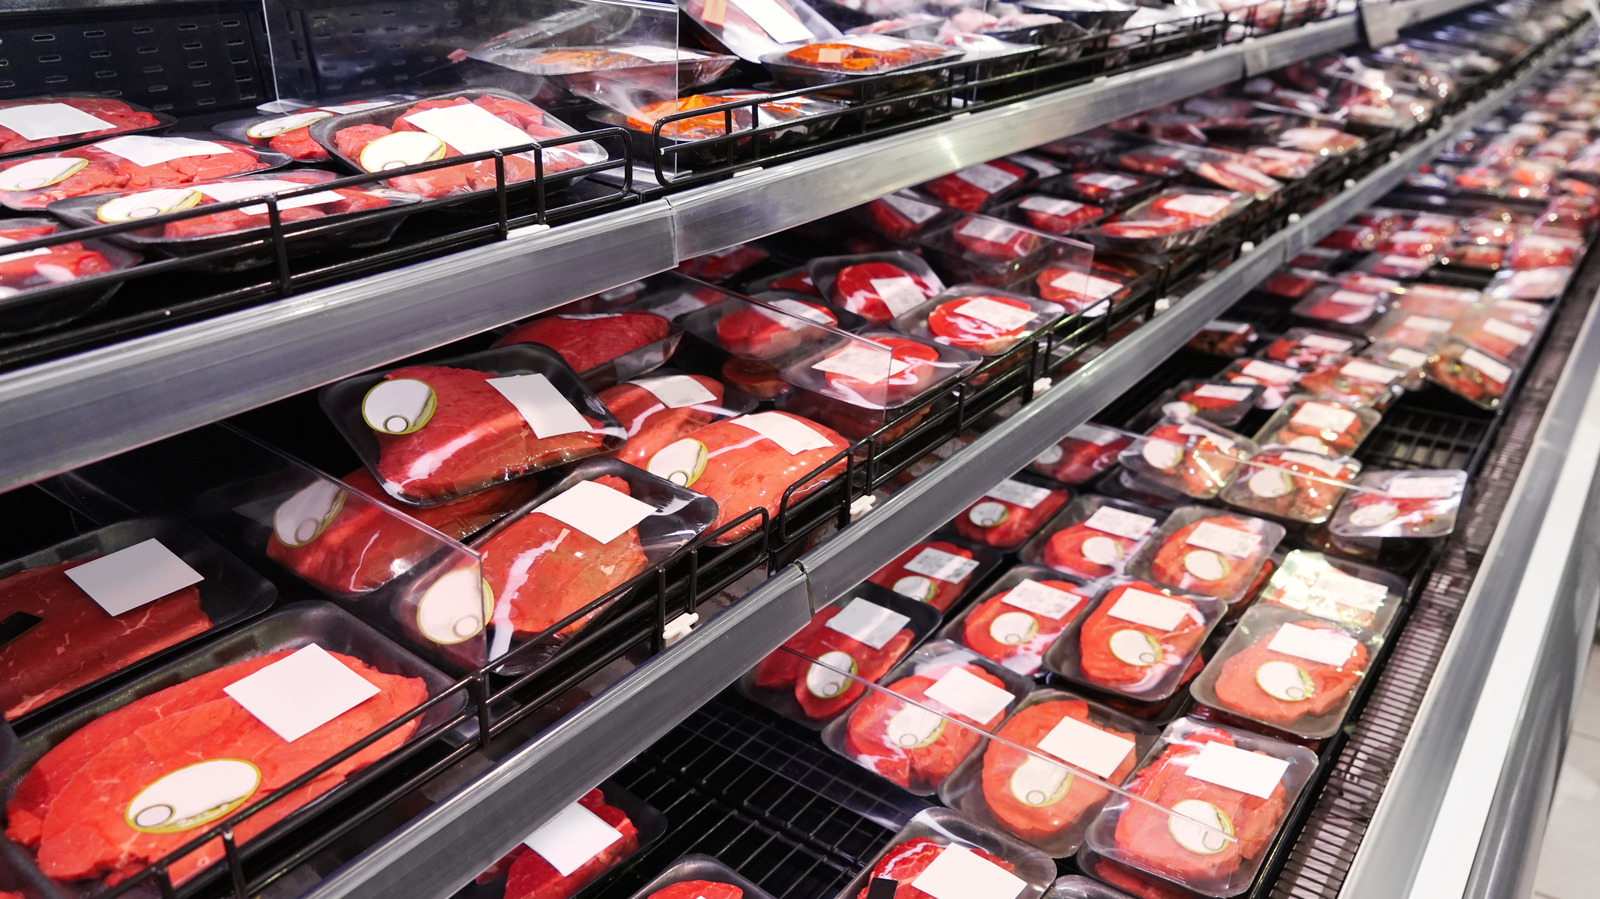 The 15 Grocery Stores With The Best Meat Departments, Ranked